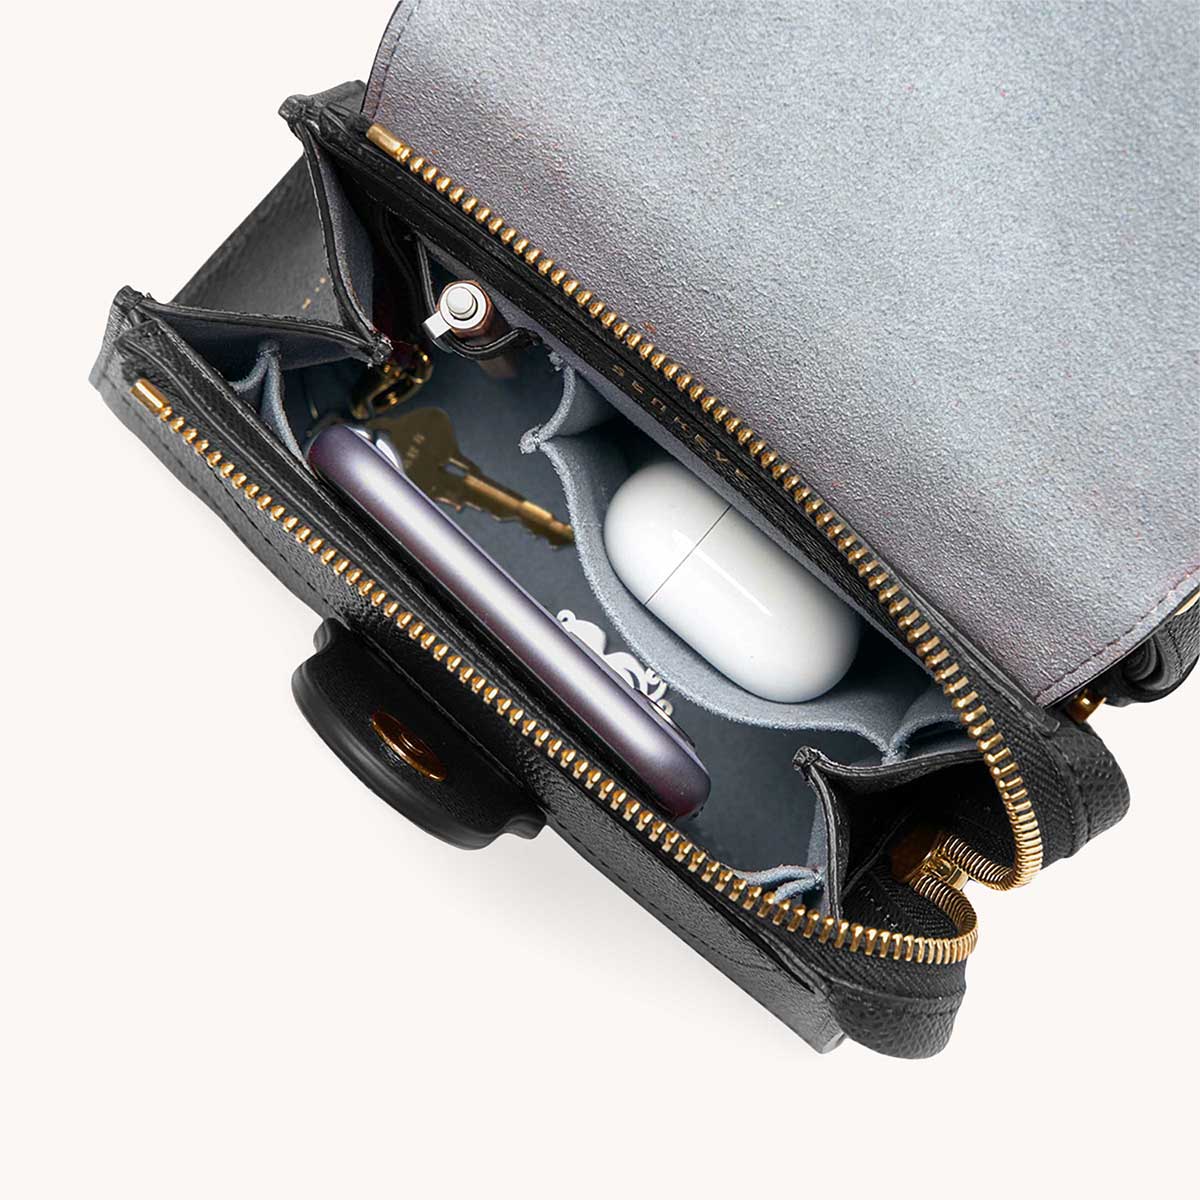 Mini Alunna Bag Pebbled Noir with Gold Hardware Interior View with What Fits: phone, AirPods, keys